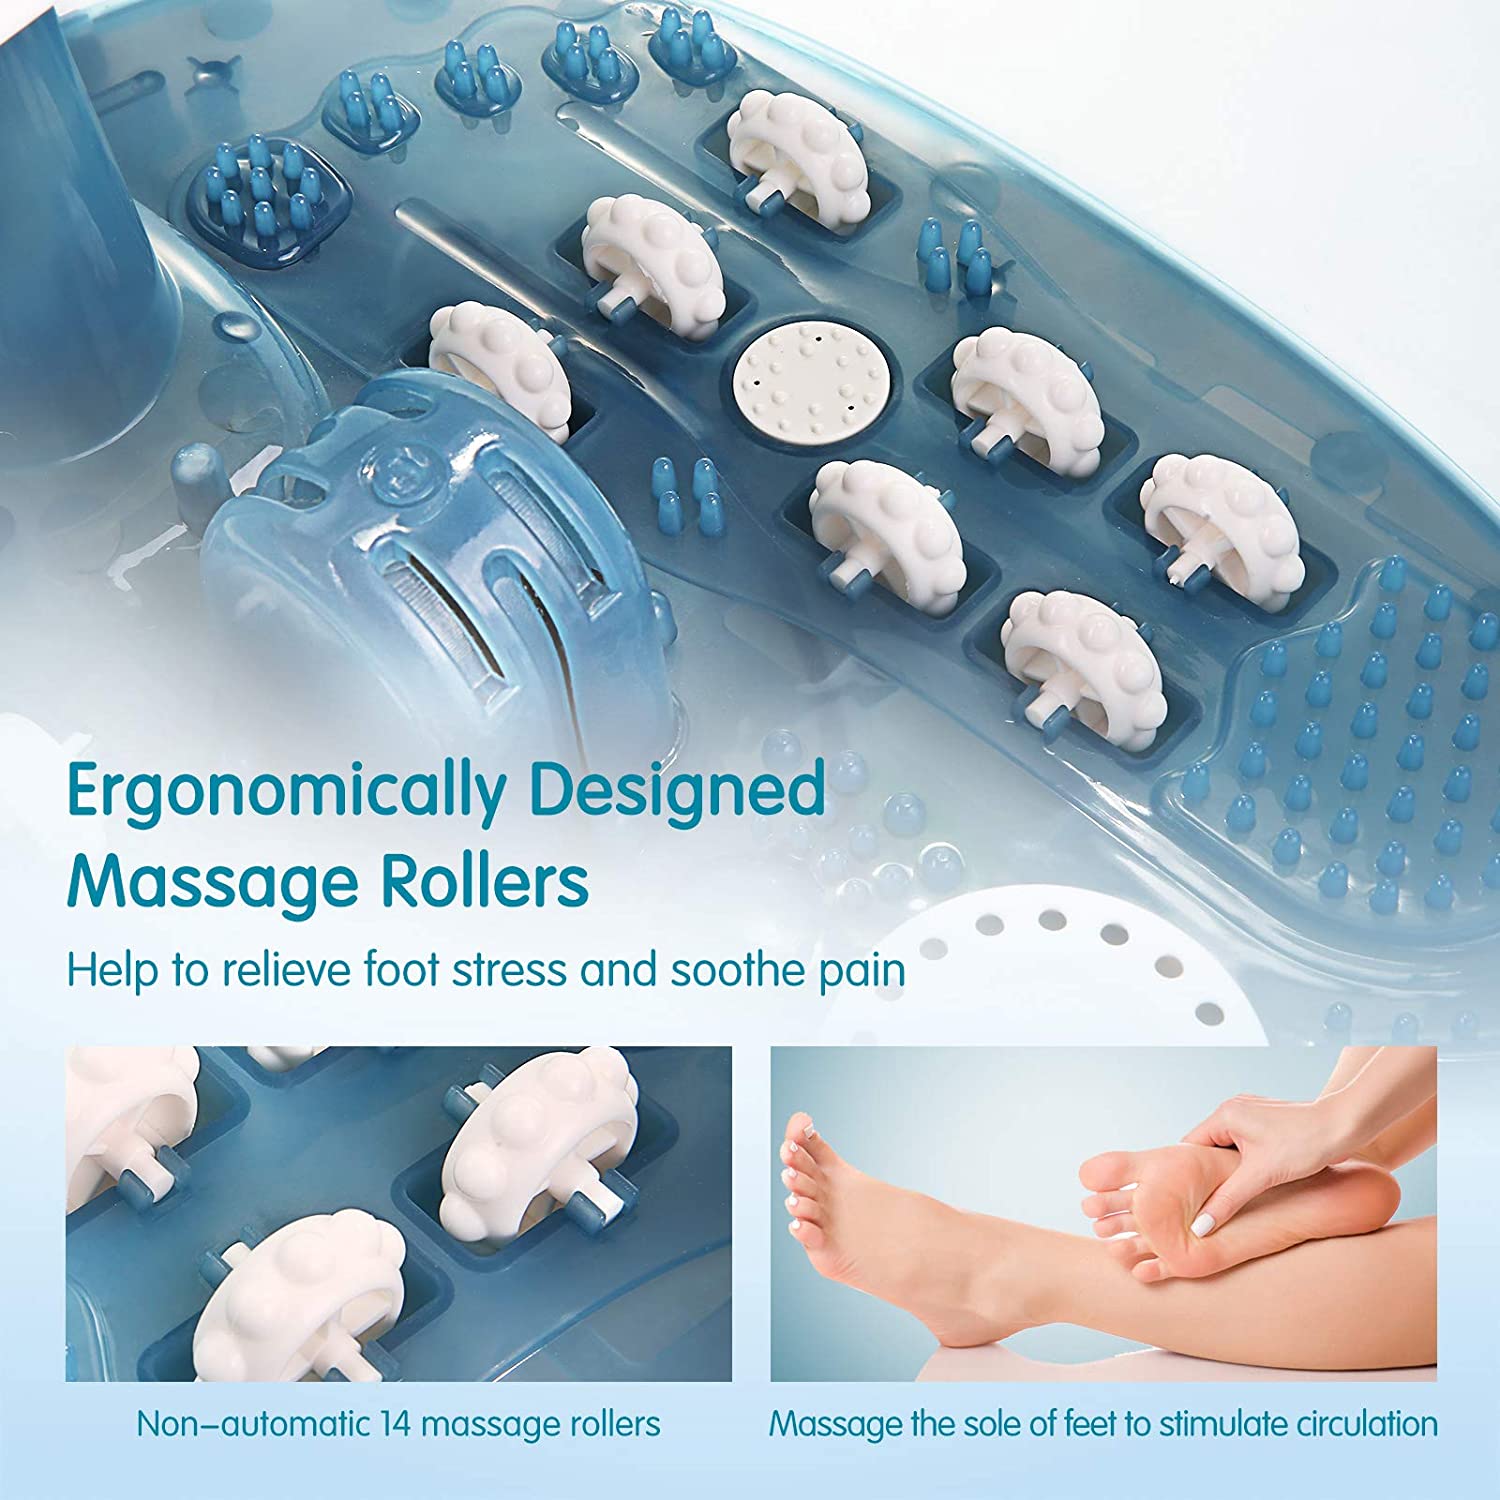 Foot Spa Tub with Bubbles and Electric Massage Rollers for Home Use - Blue